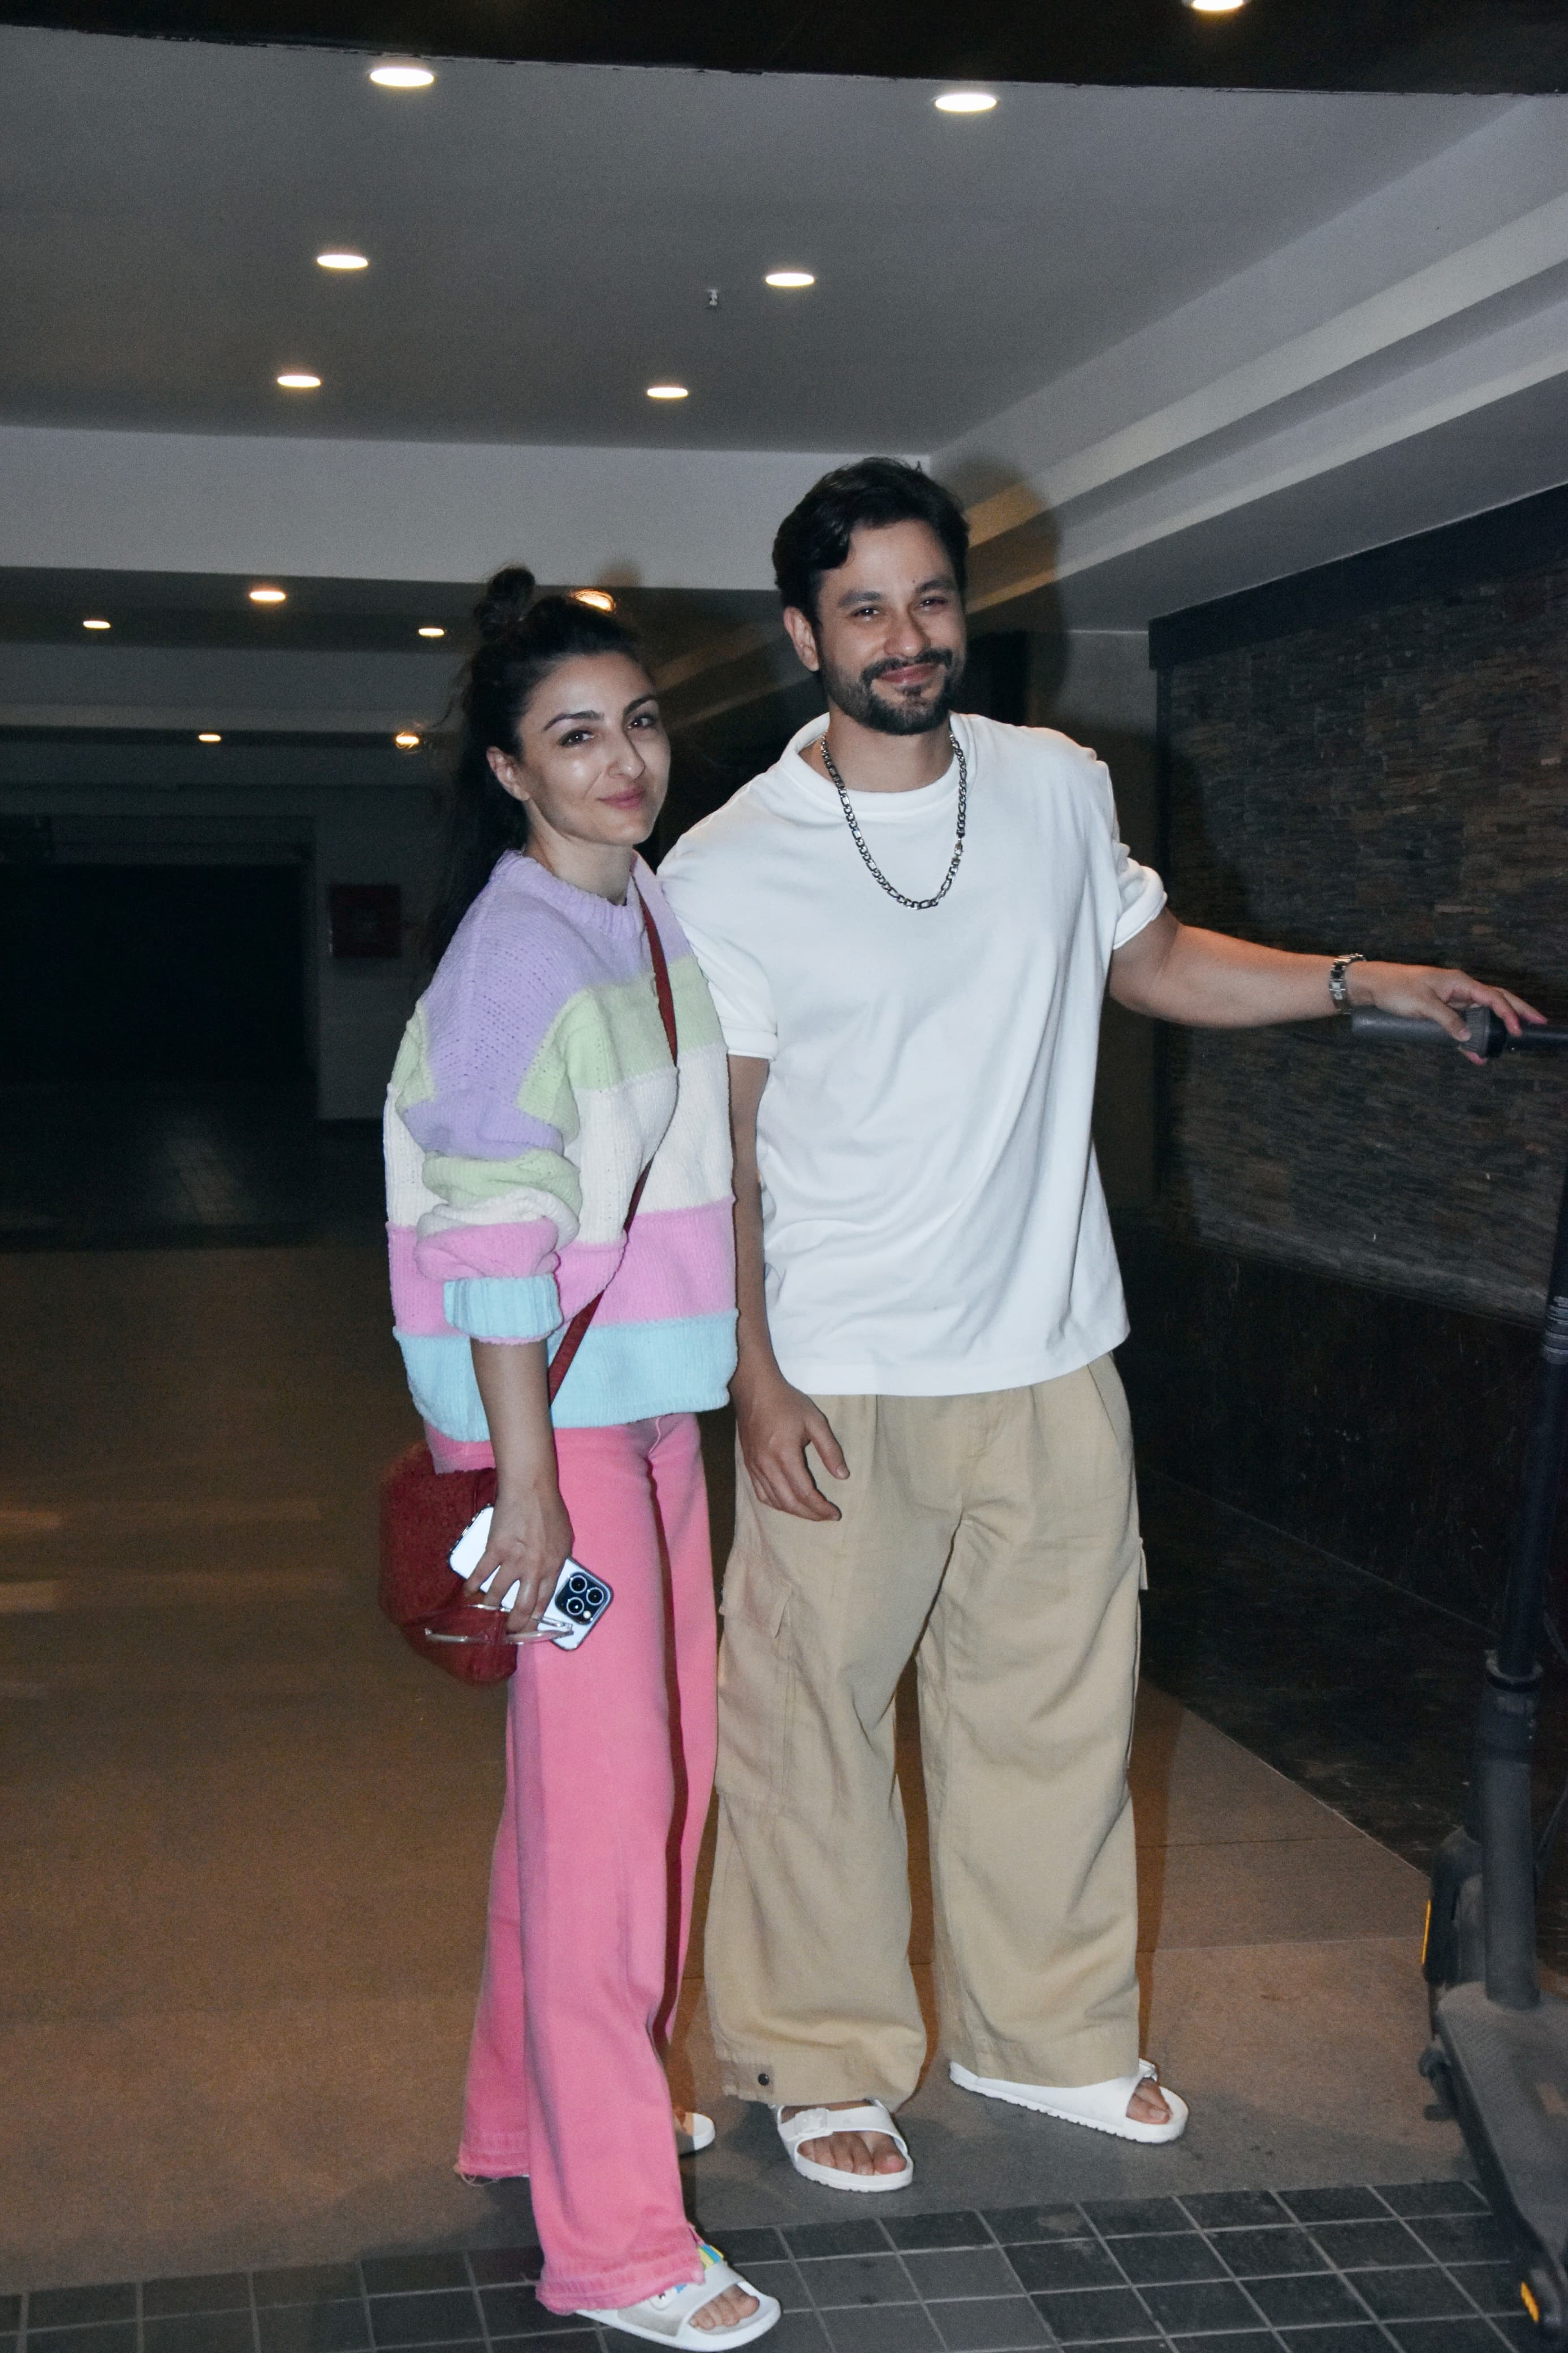 Kunal Kemmu and Soha Ali Khan looked super cute as they went out and about in the city